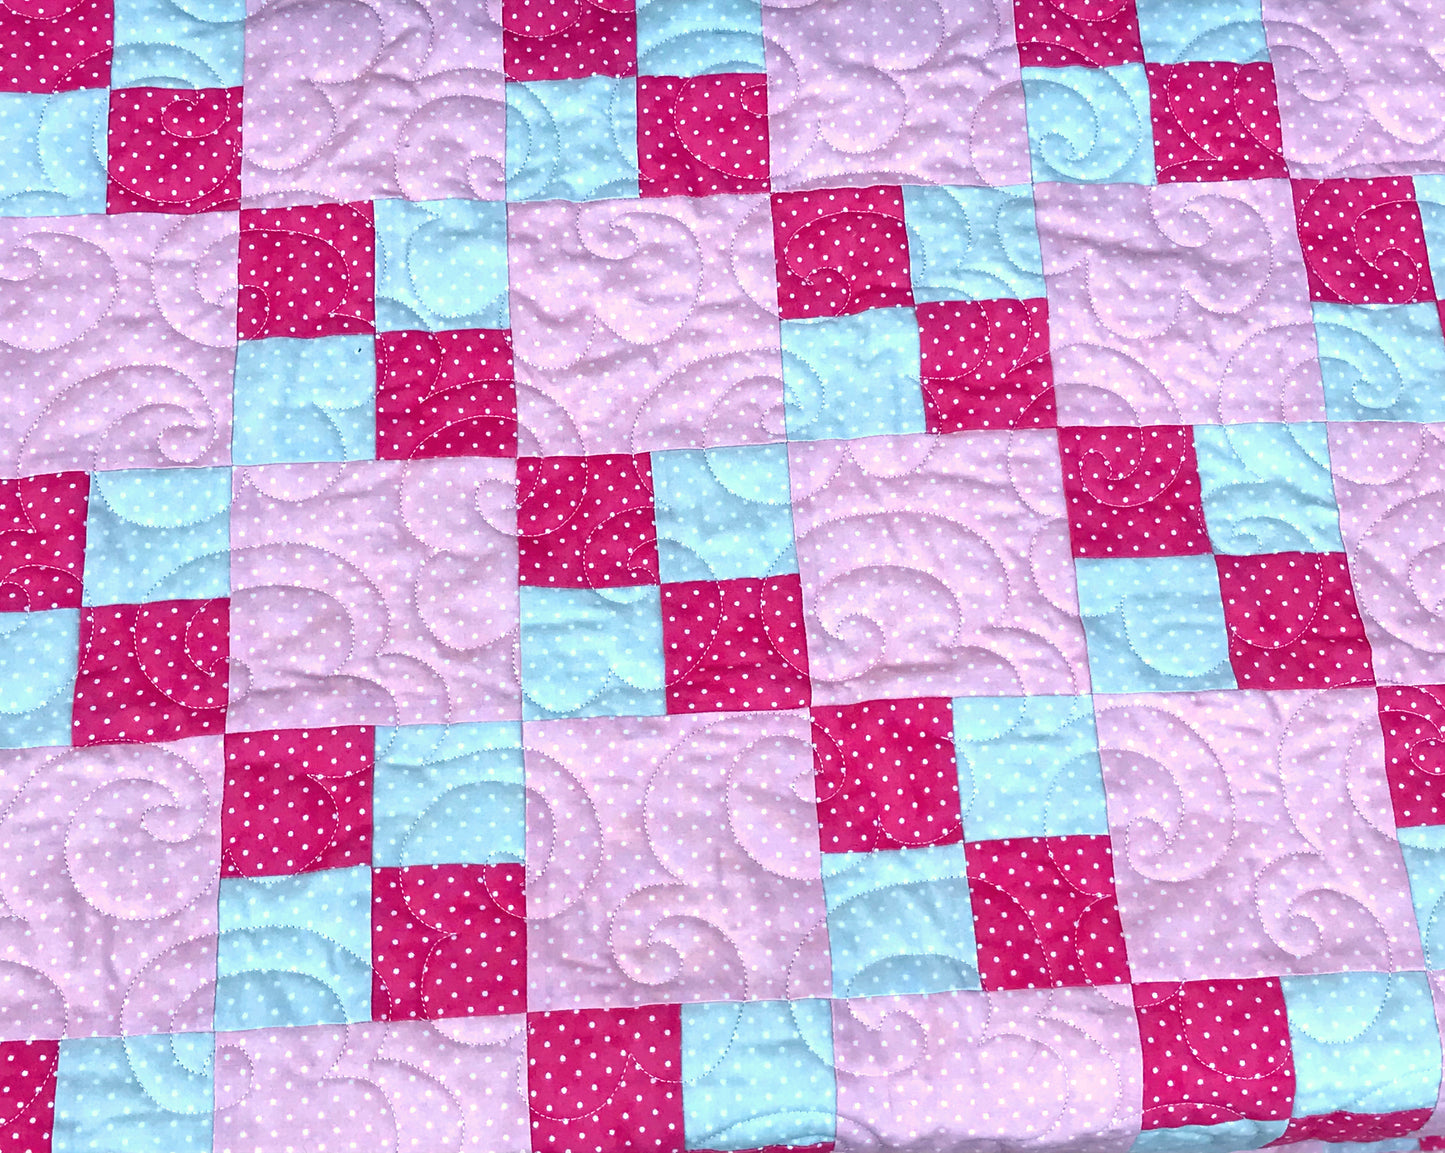 Pink and Gray Double Four Patch Baby or Toddler Quilt - Handmade Quilts, Digital Patterns, and Home Décor items online - Cuddle Cat Quiltworks